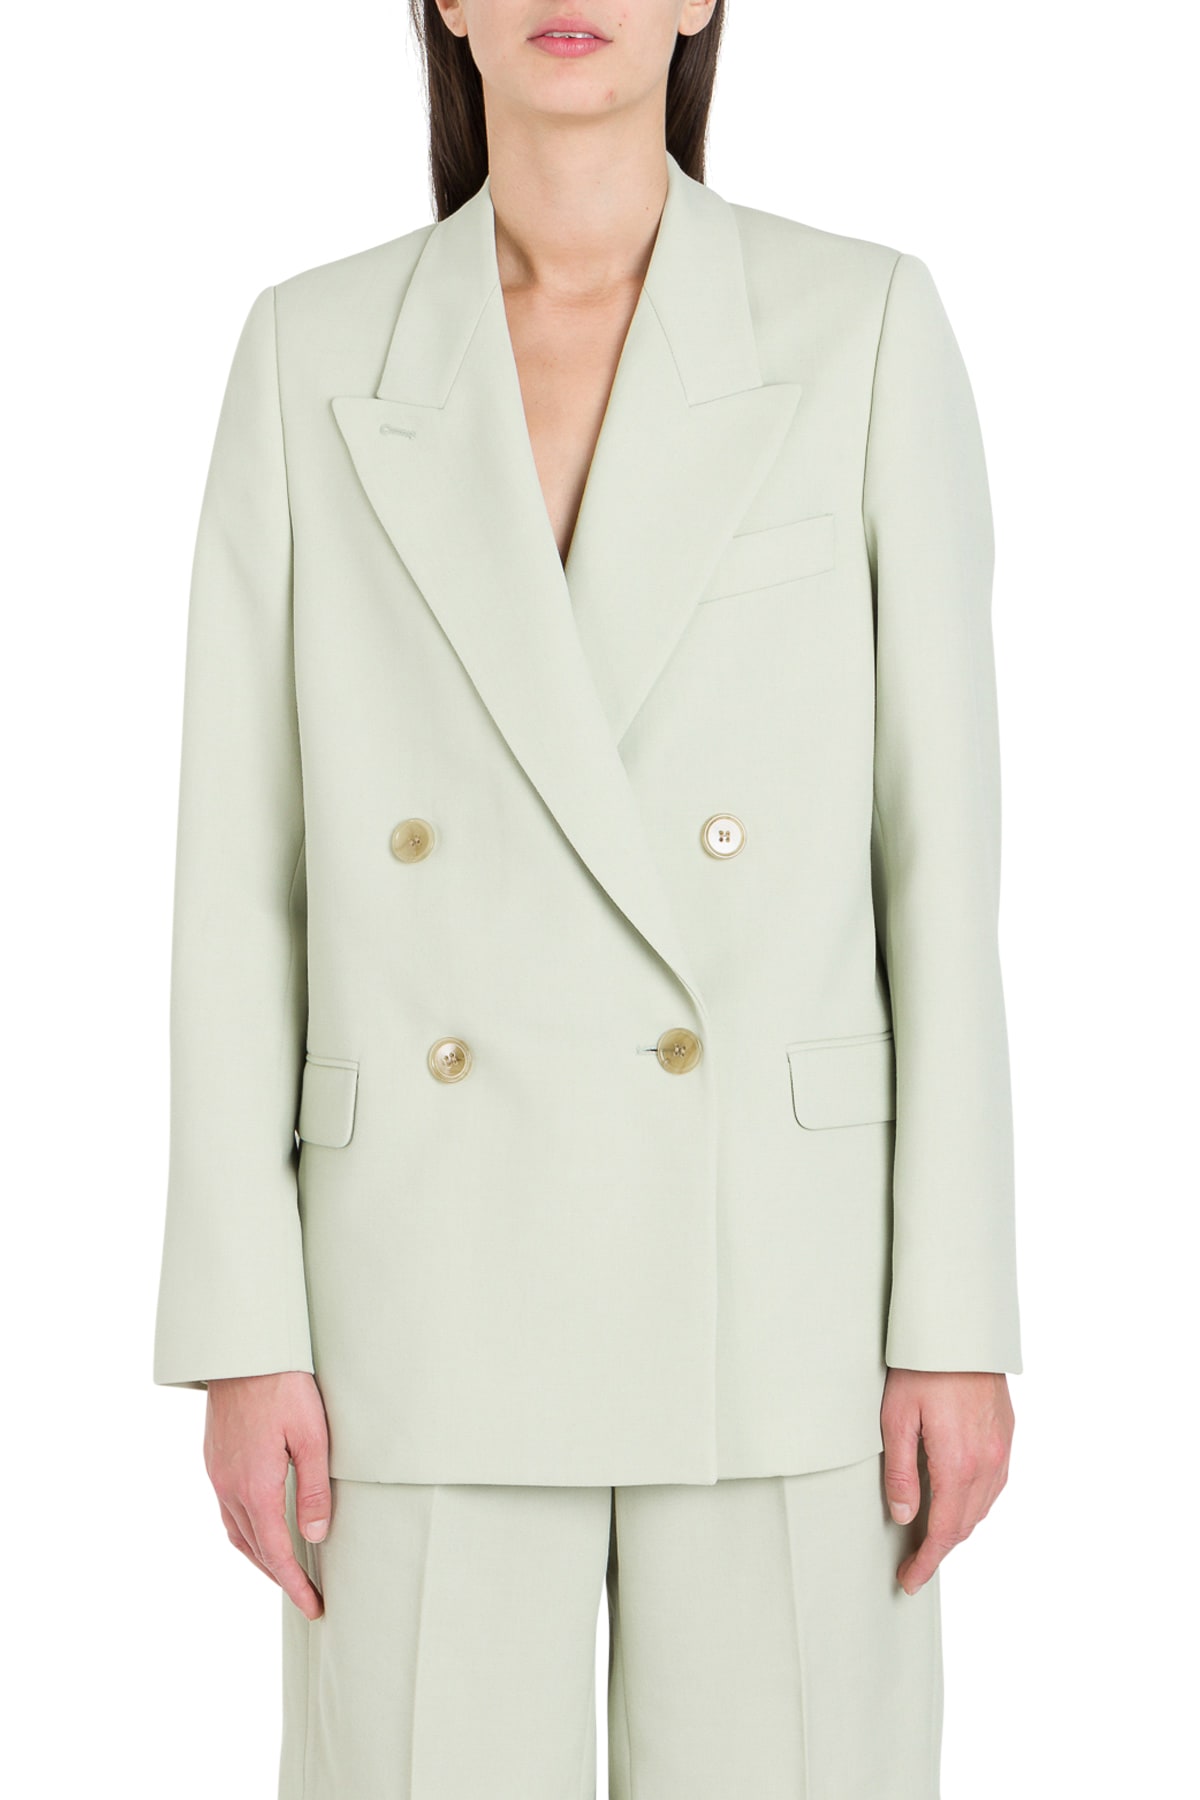 ACNE STUDIOS JANNY DOUBLE-BREASTED CANVAS JACKET,11244567